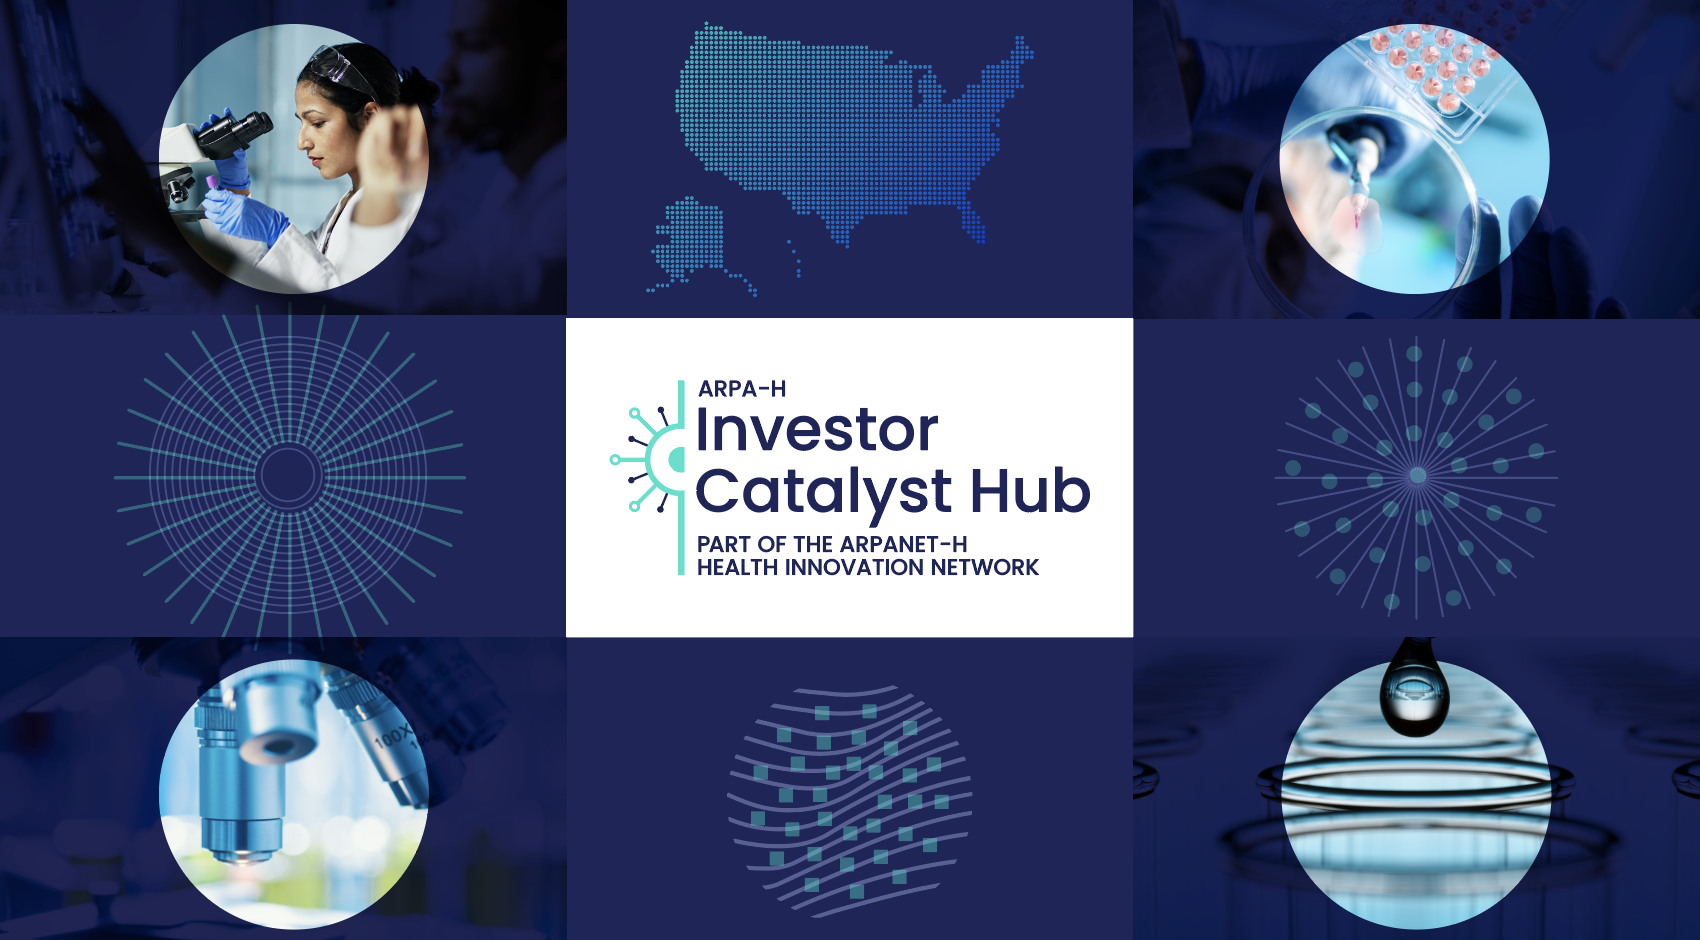 ARPA-H Investor Catalyst Hub, part of the ARPANET-H Health Innovation Network; images of scientific work and a silhouette map of the United States